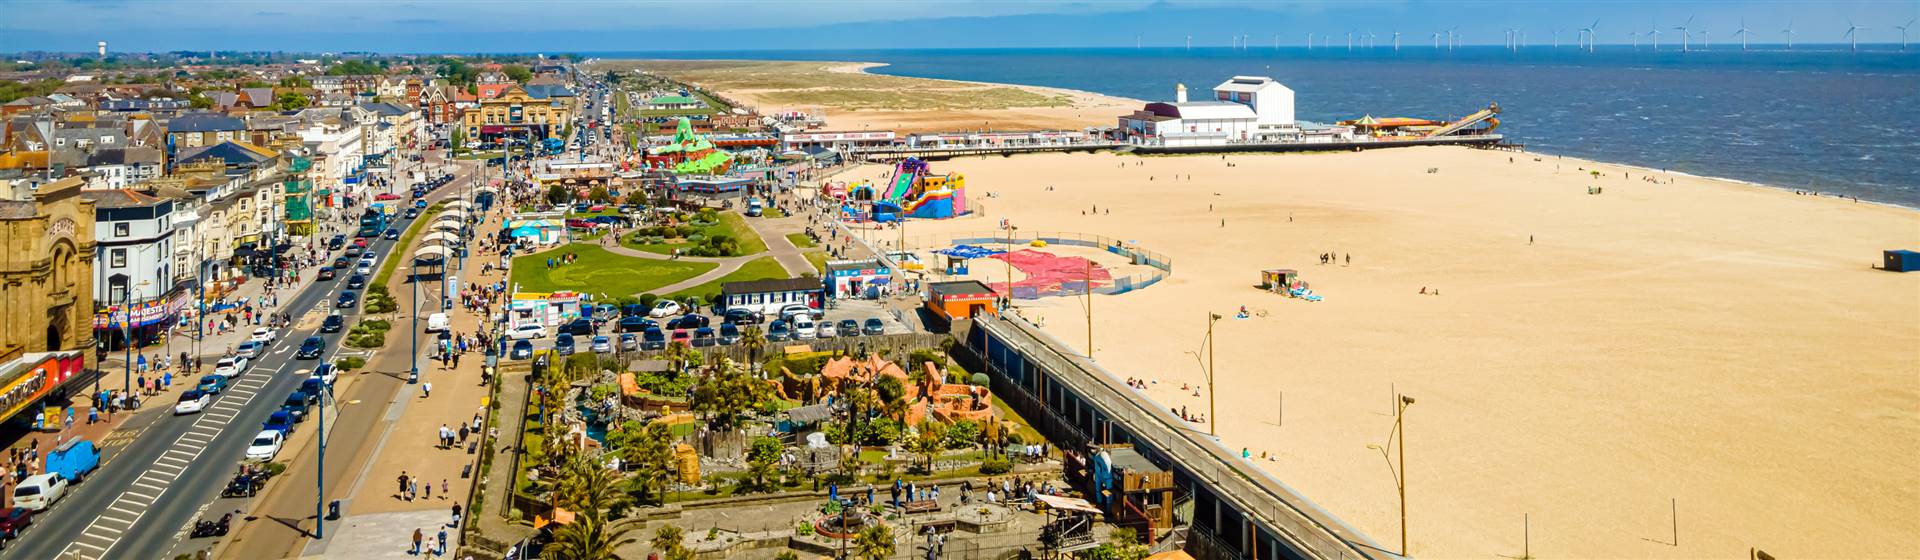 Great Yarmouth & The Norfolk Broads